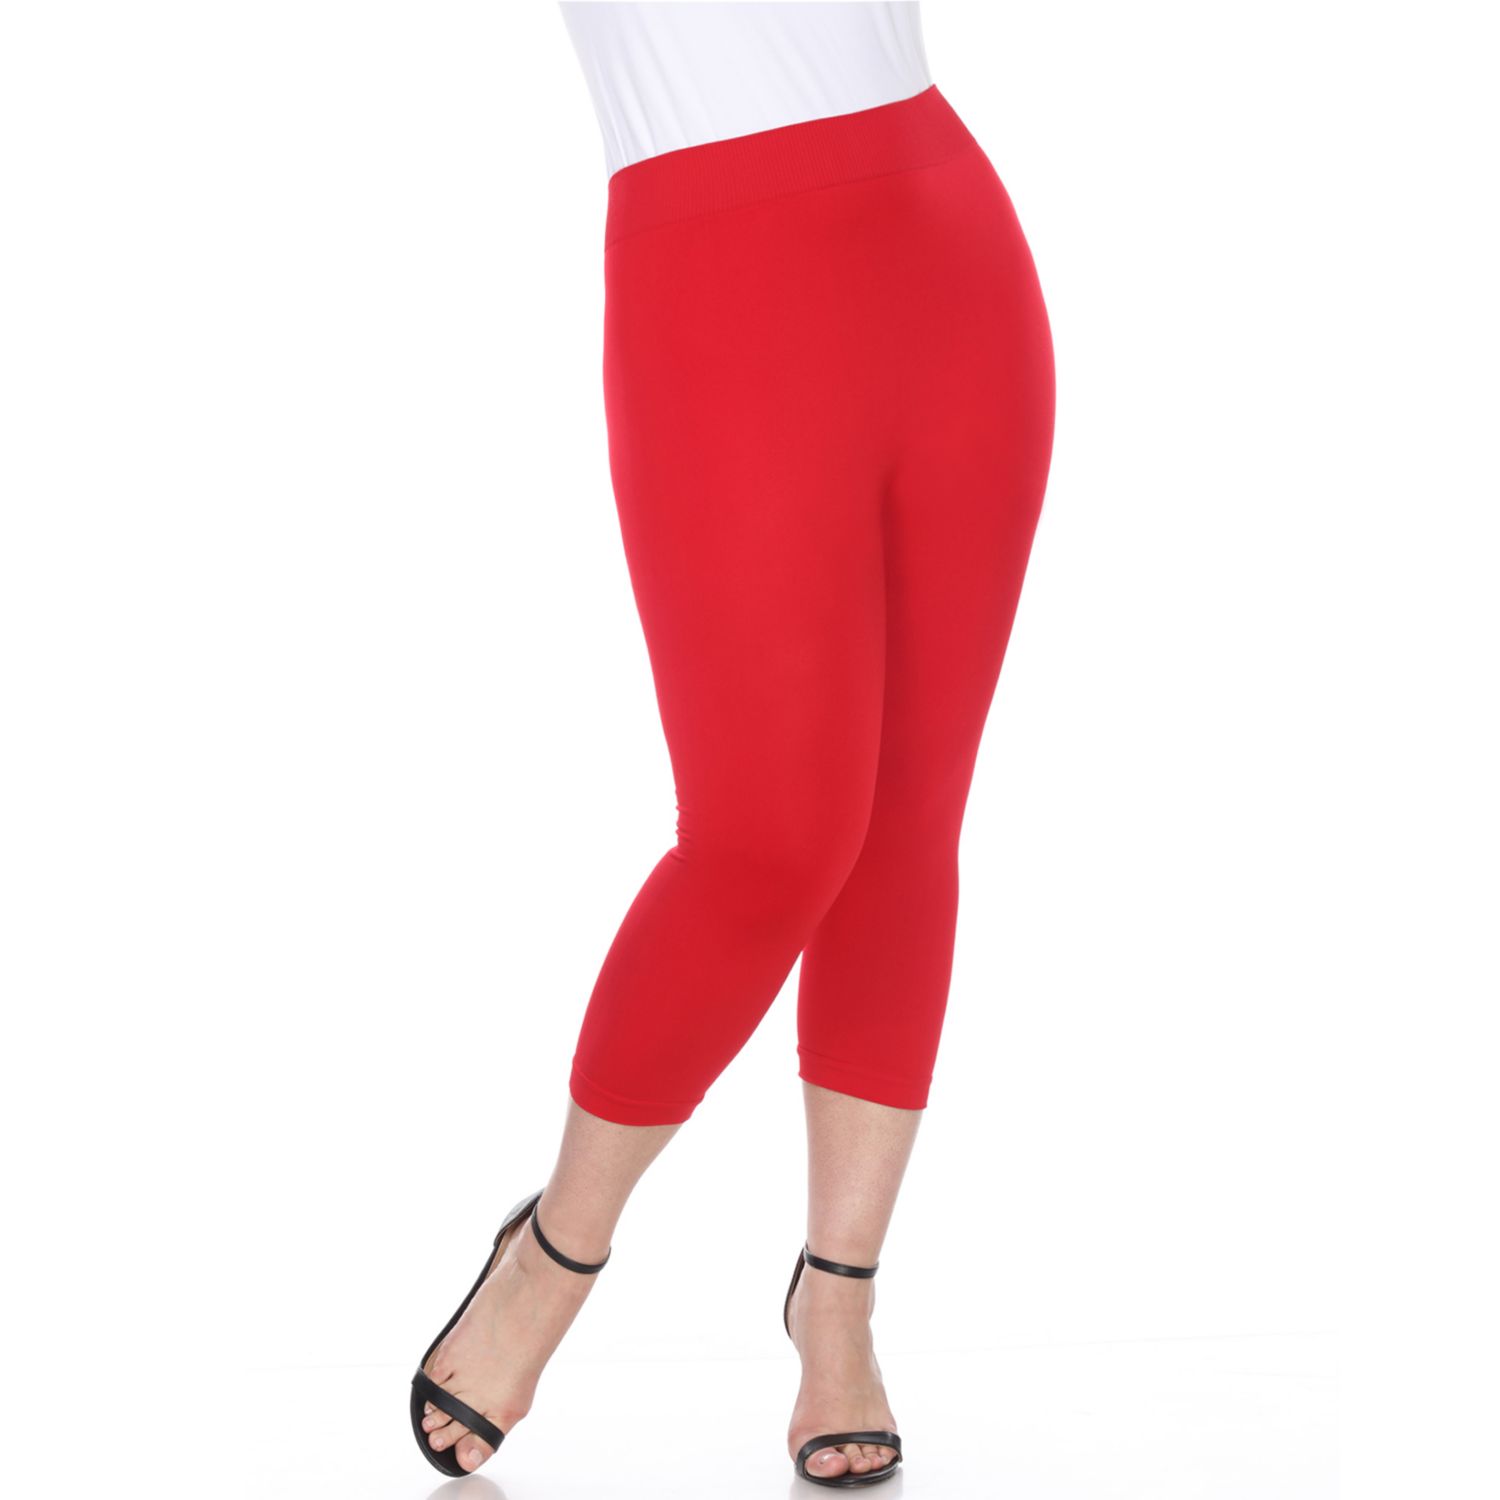 red and white leggings plus size